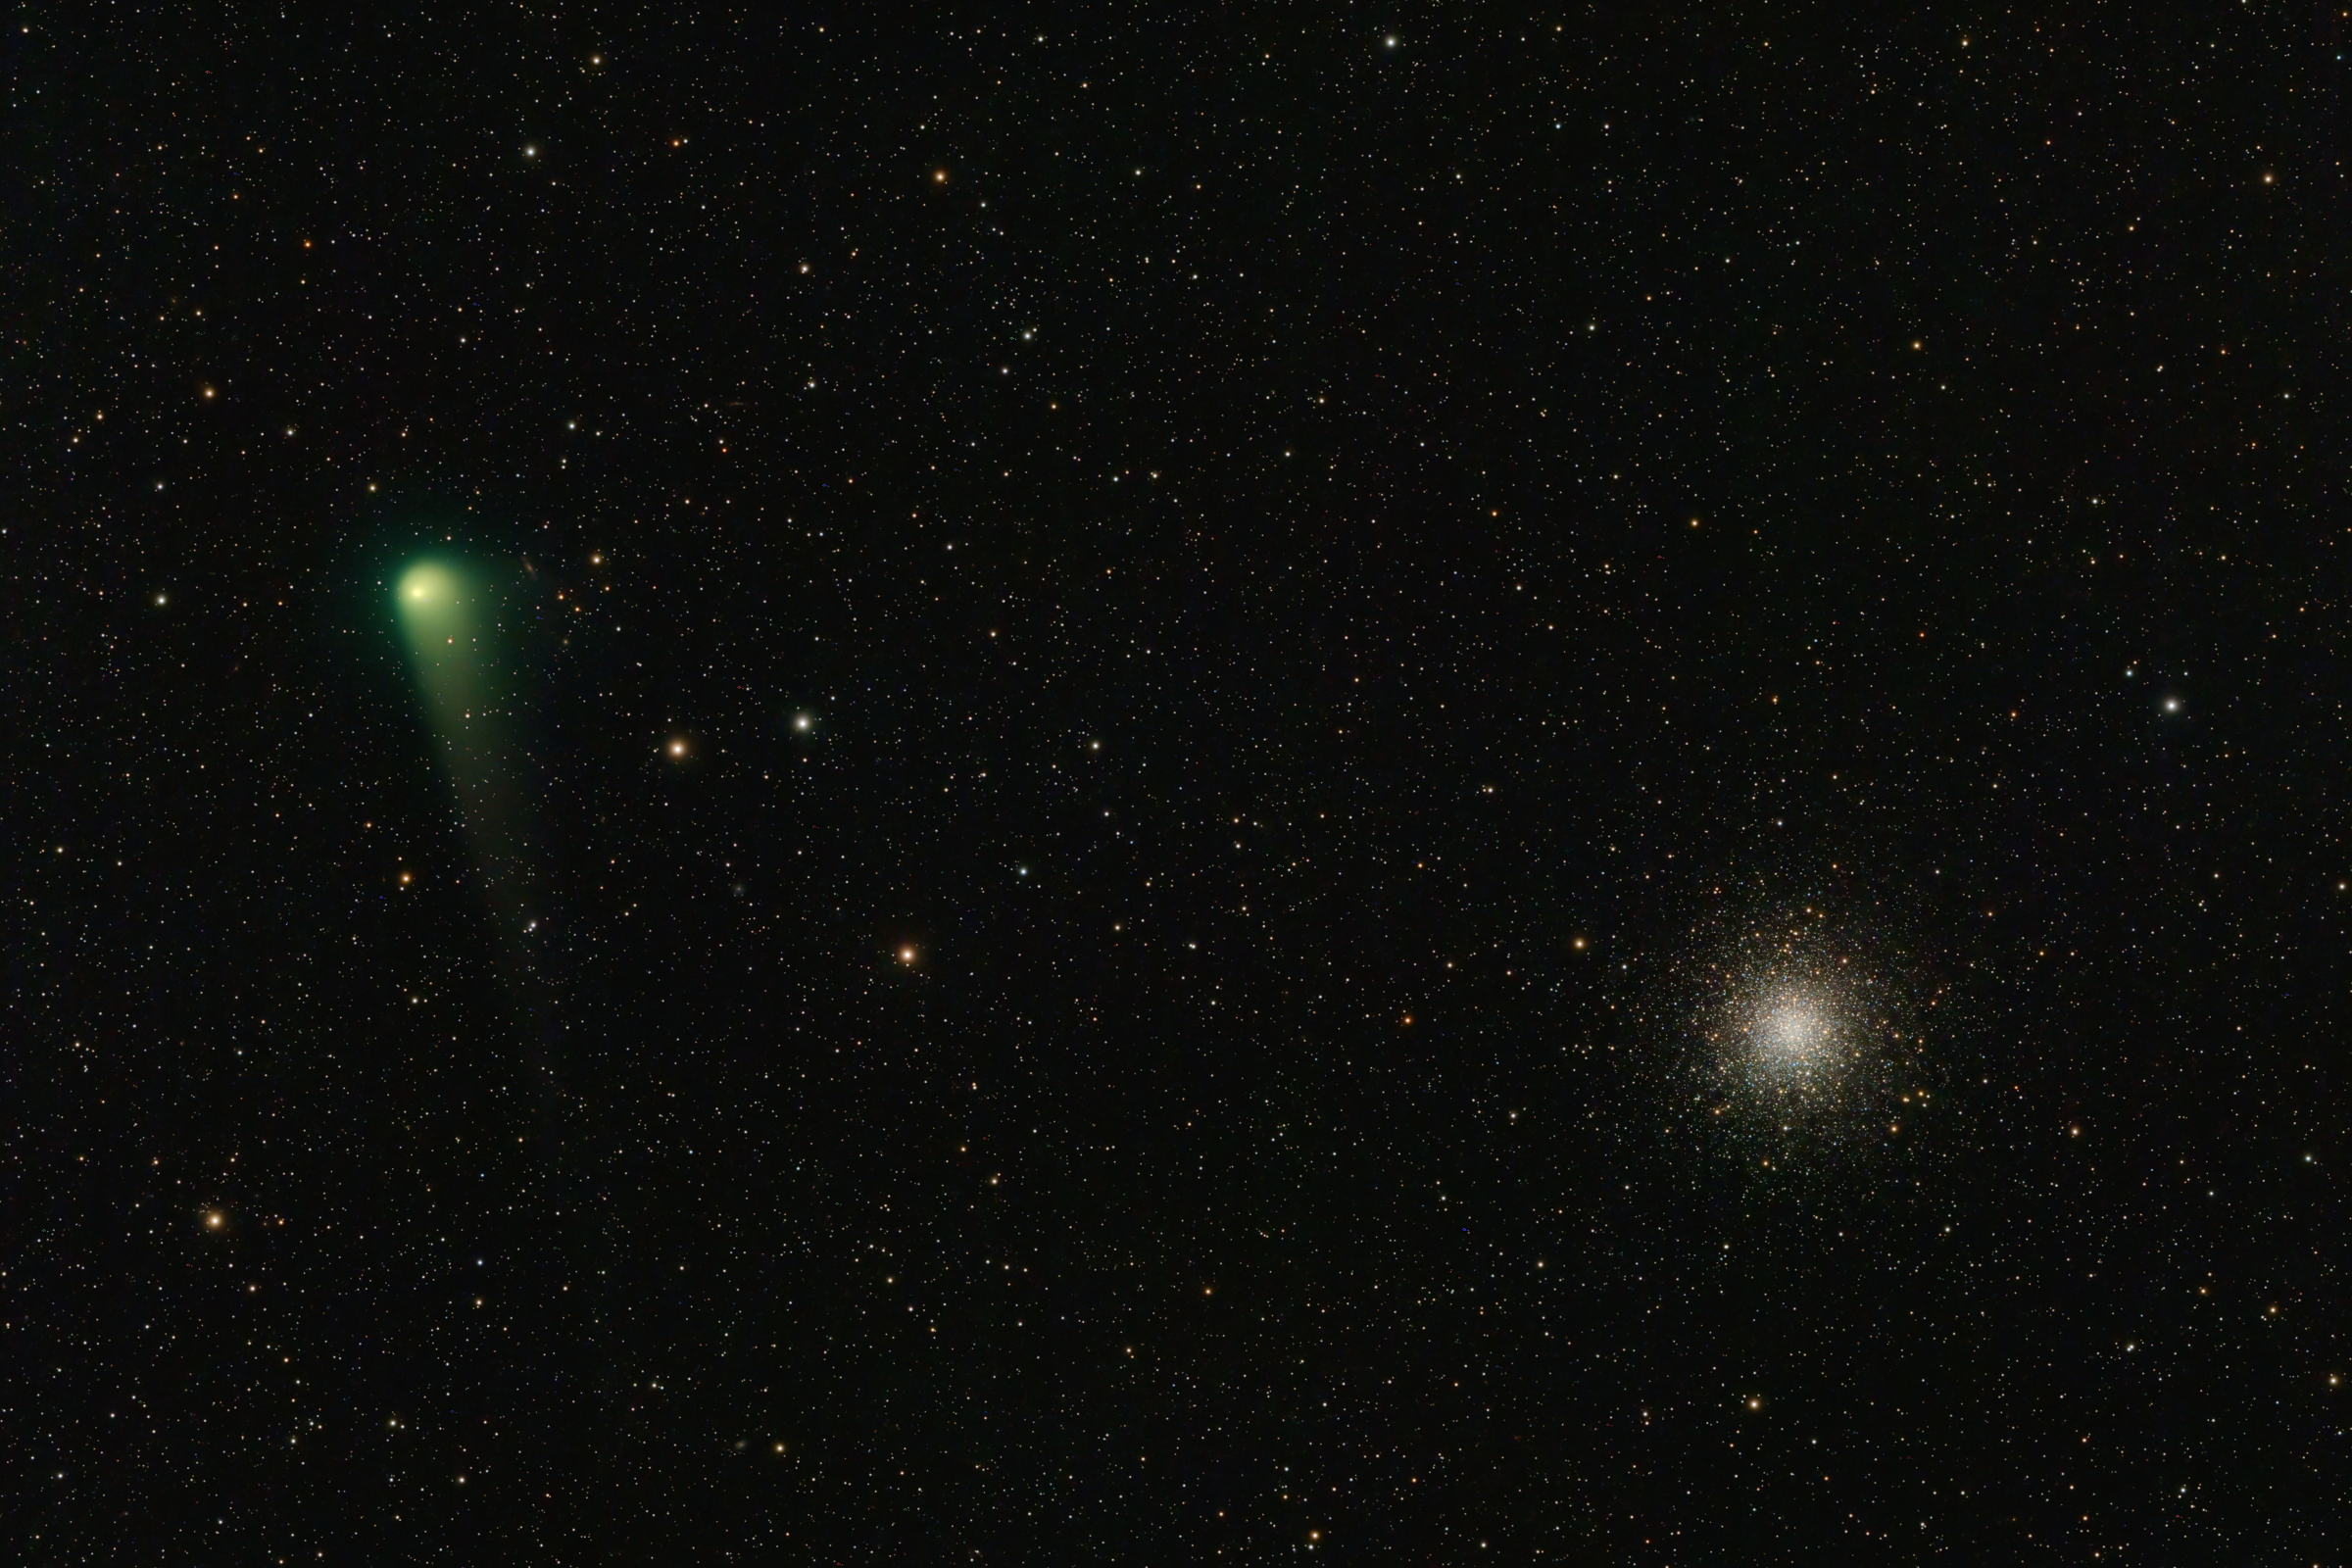 M10 and C/2017 K2